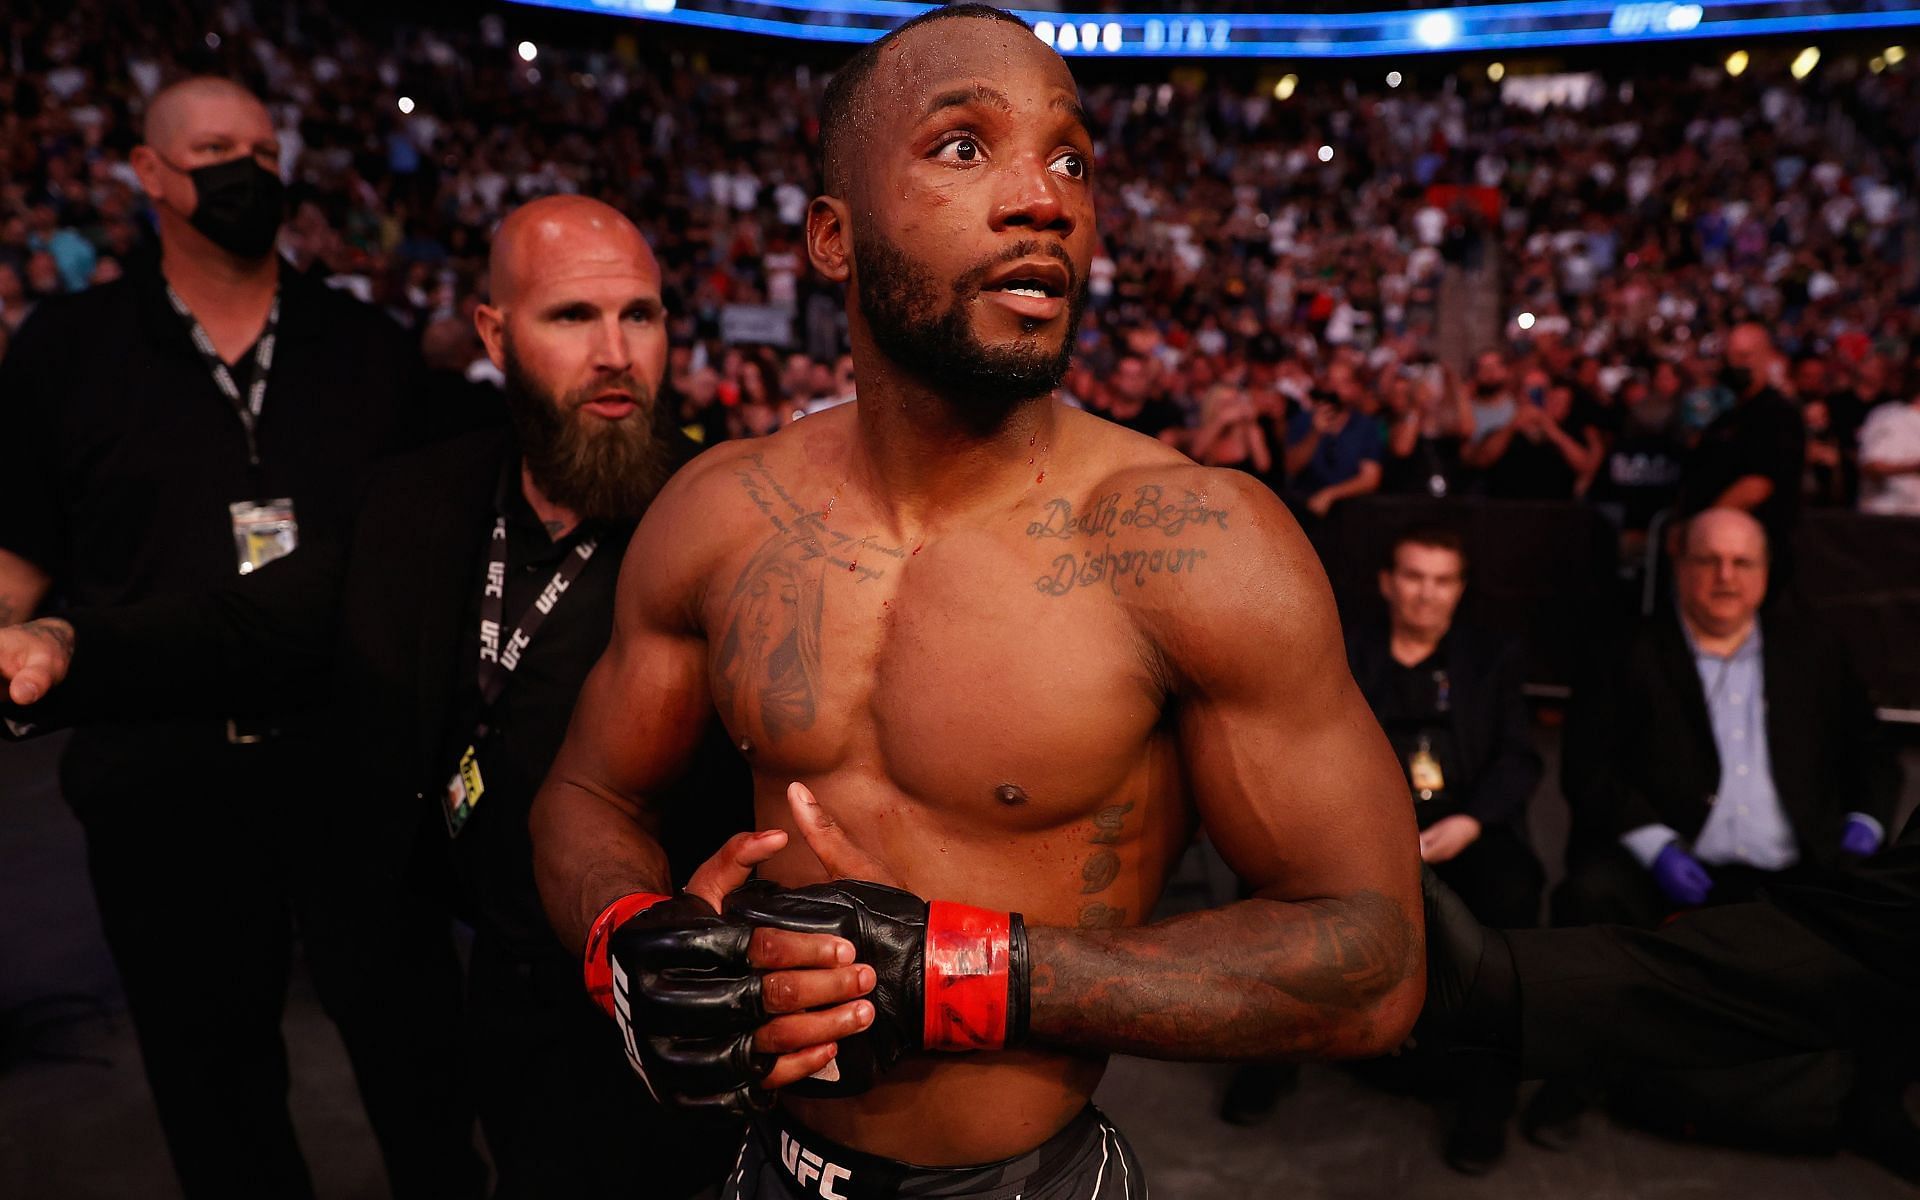 Leon Edwards following his UFC 263 victory over Nate Diaz